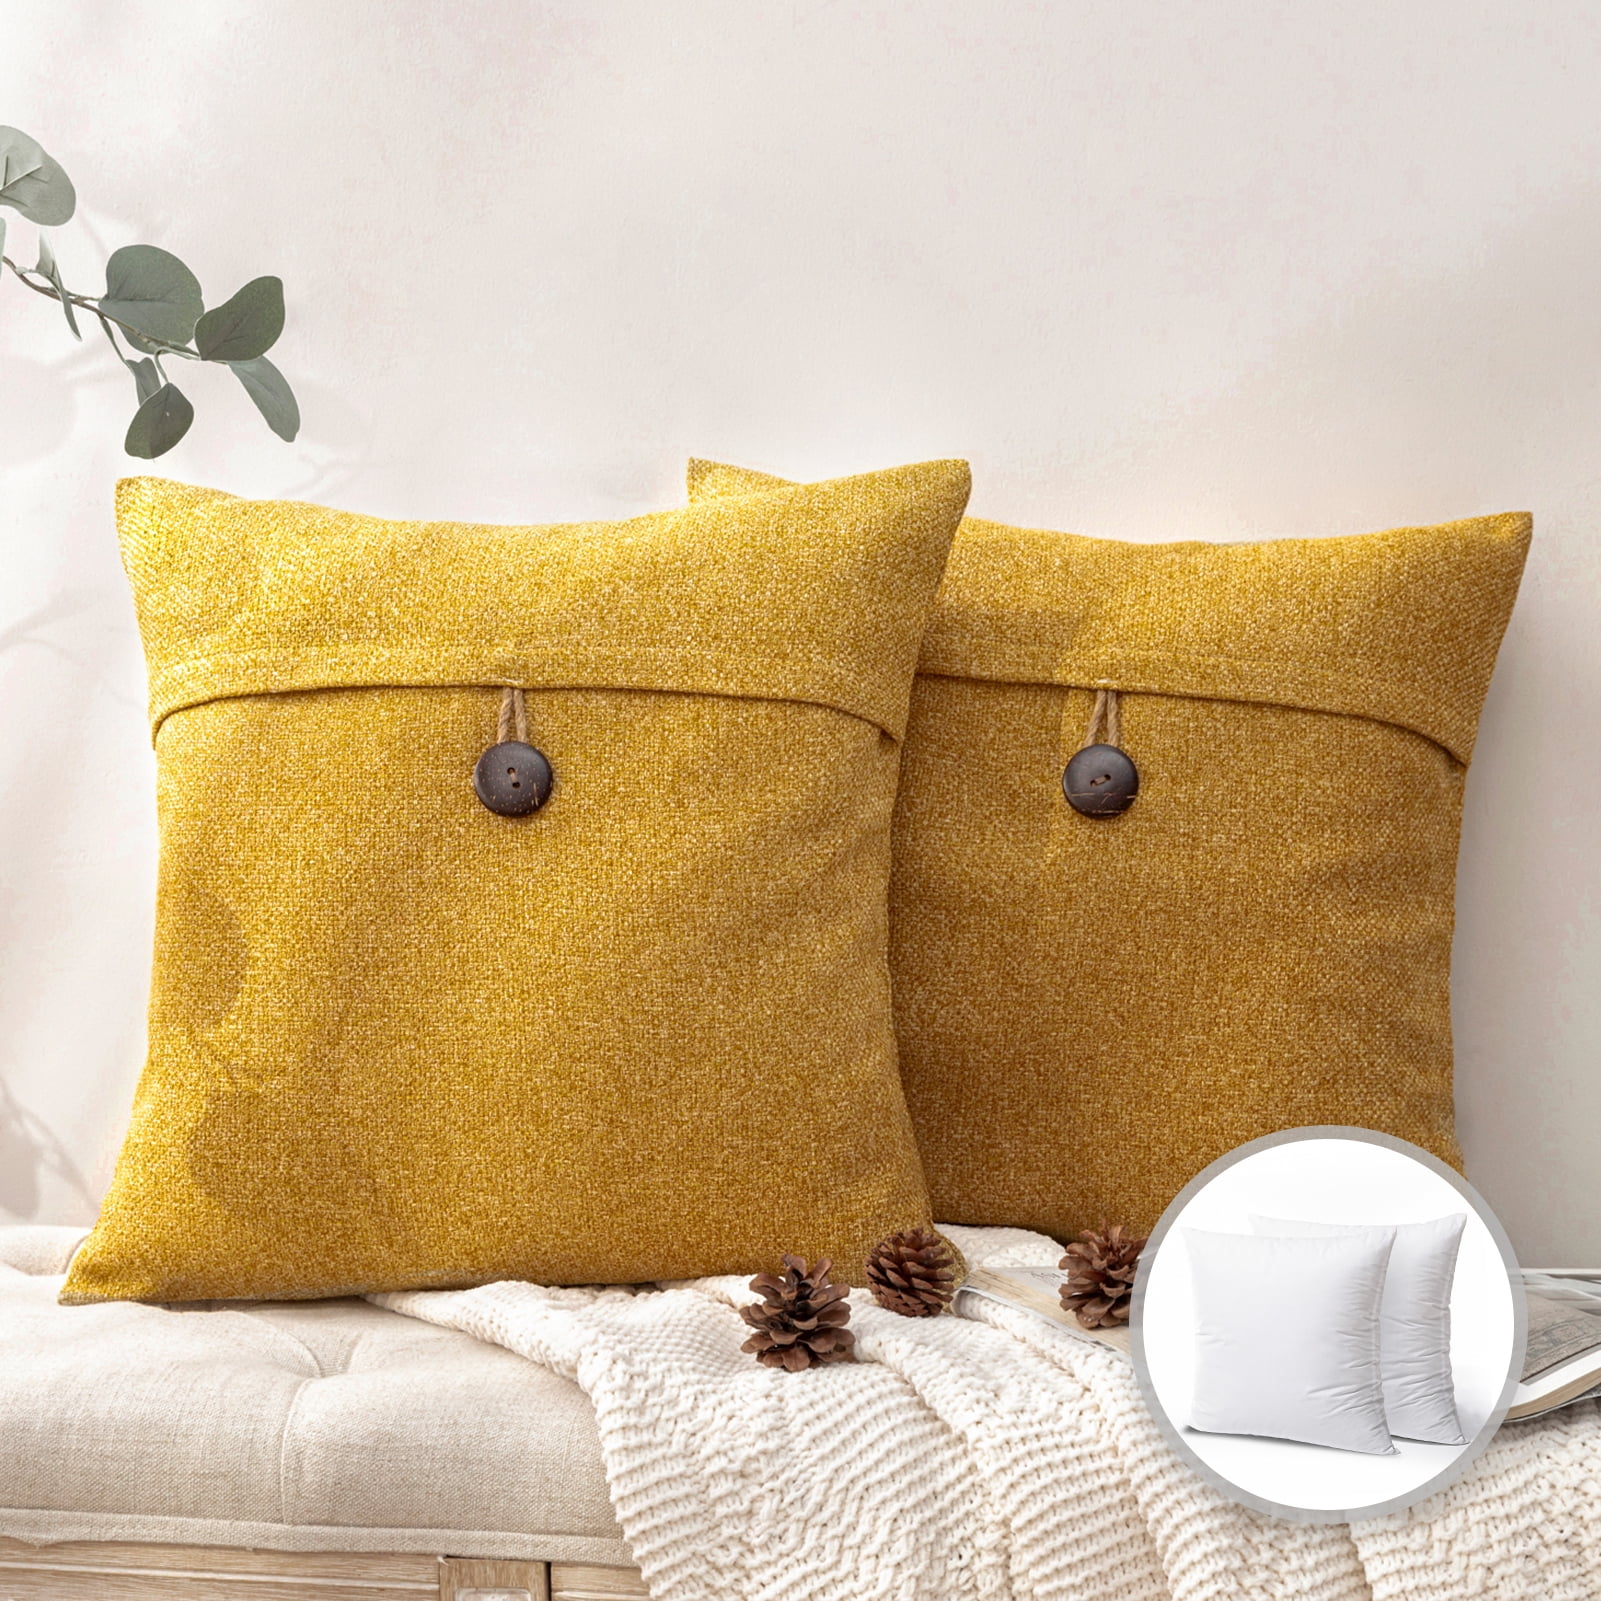 Single Button Series Farmhouse Rectangle Decorative Polyester Throw Pillow Cusion for Couch, 12 inch x 20 inch, Yellow, 2 Pack